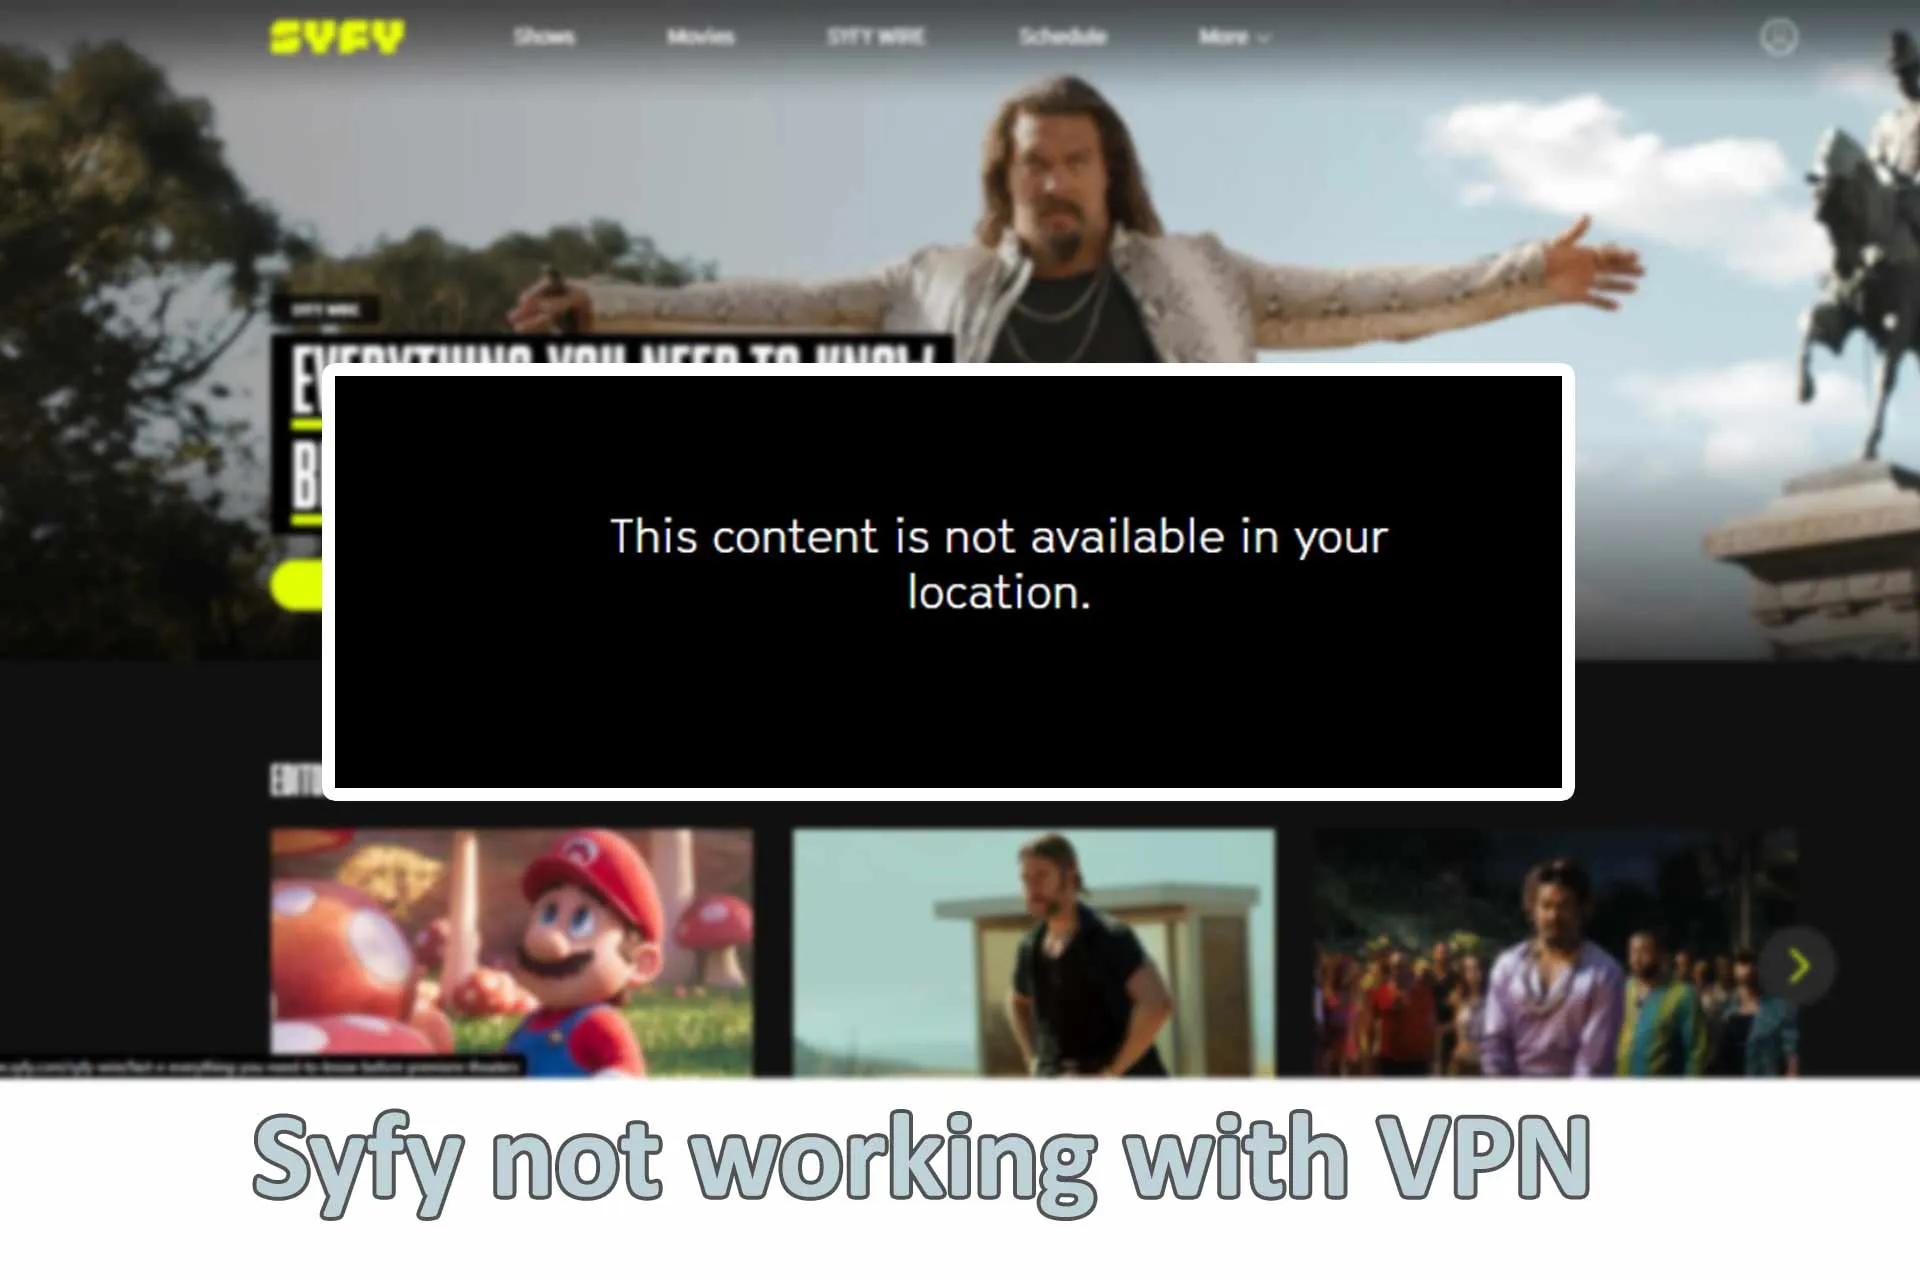 Syfy not working with VPN